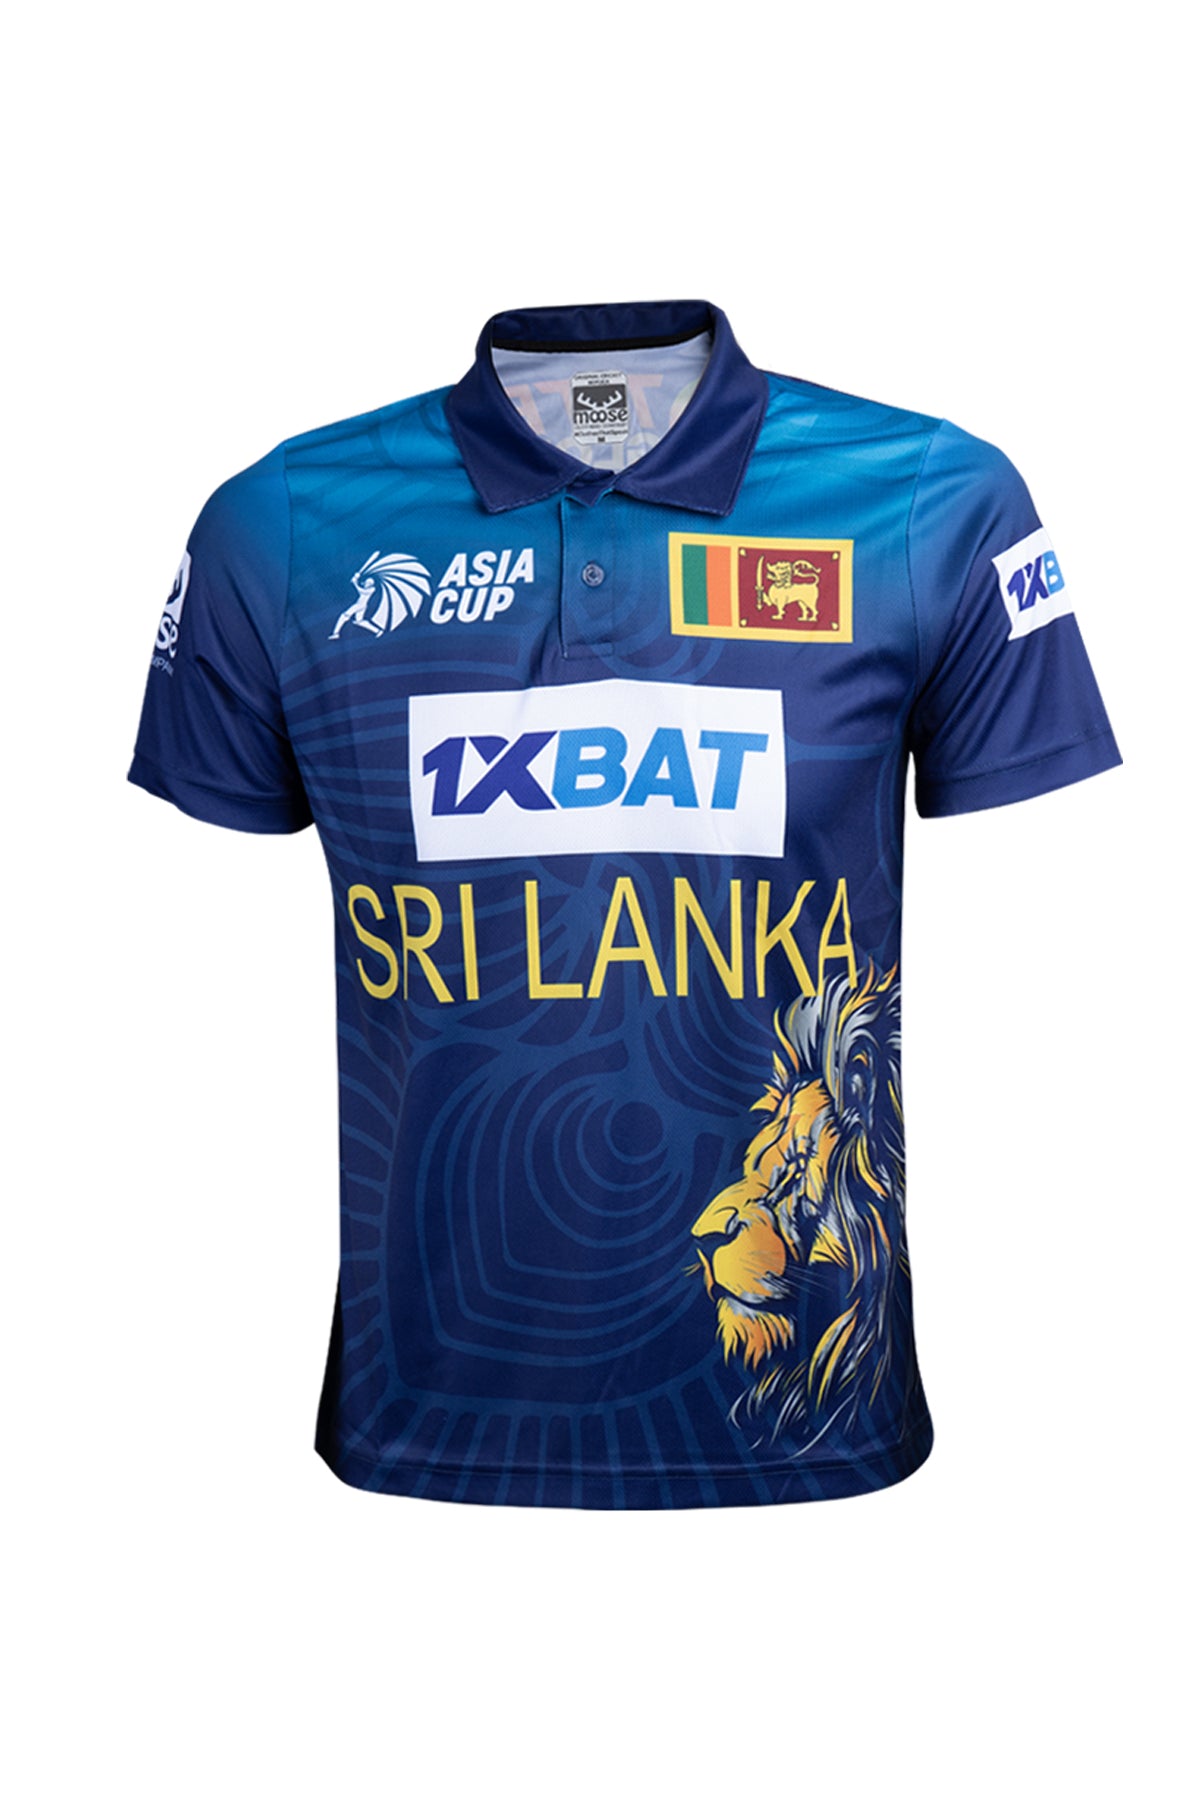 Moose T20 Asia Cup T - Shirt